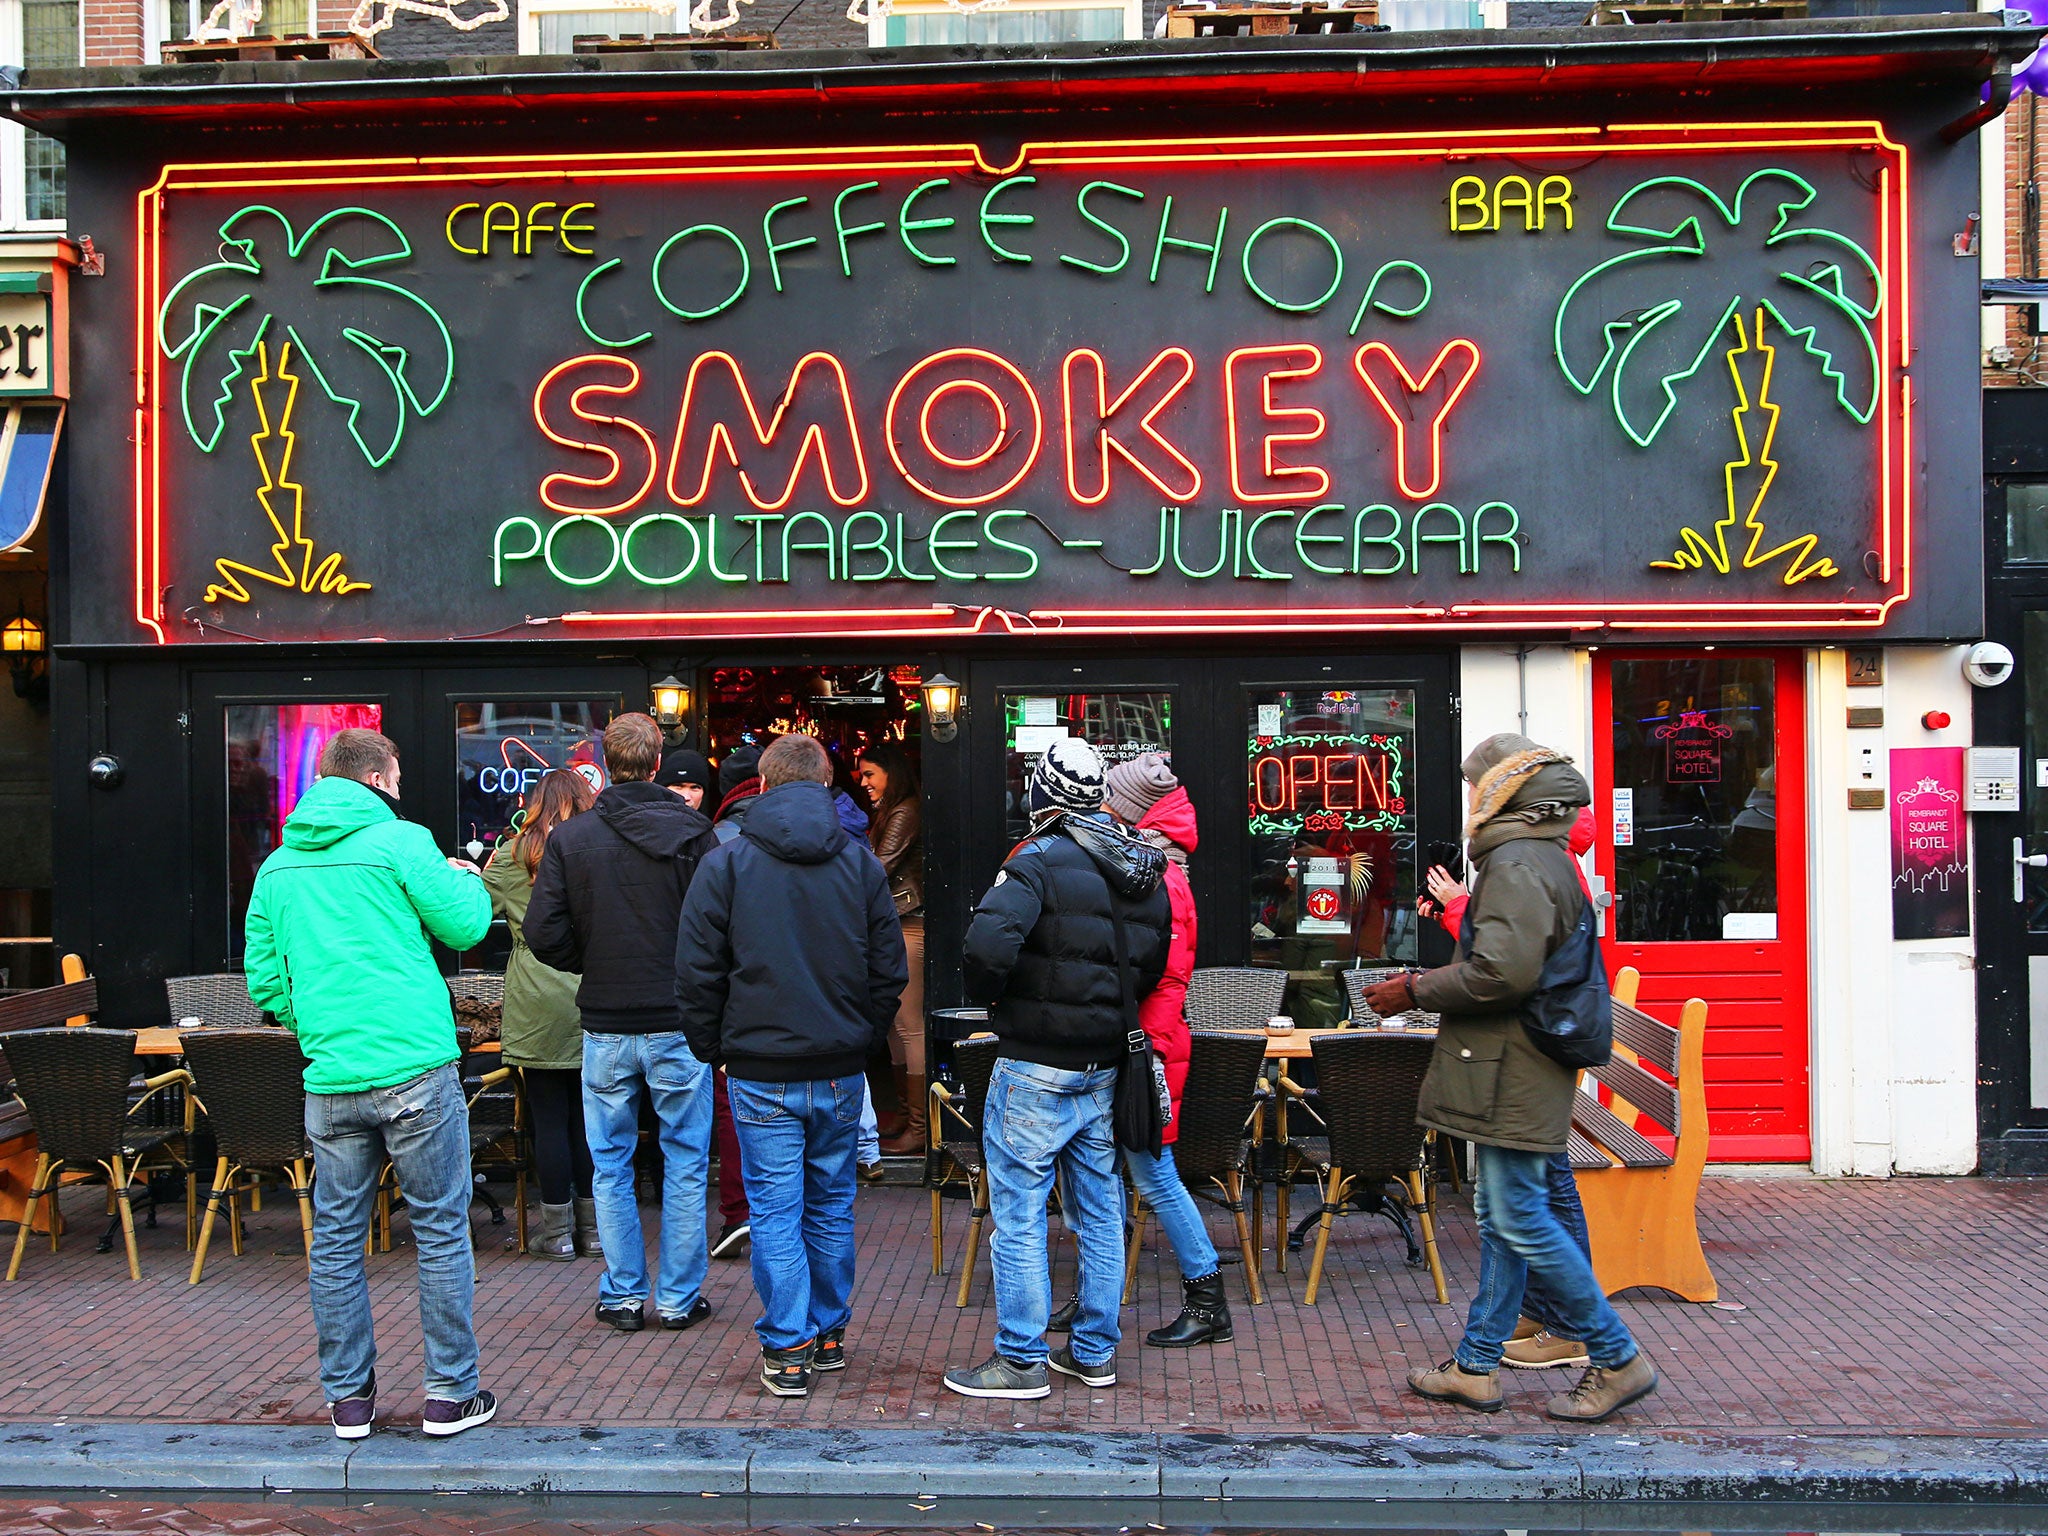 In the Netherlands, 'coffeeshops' serve as licensed premises permitting the sale and personal consumption of cannabis